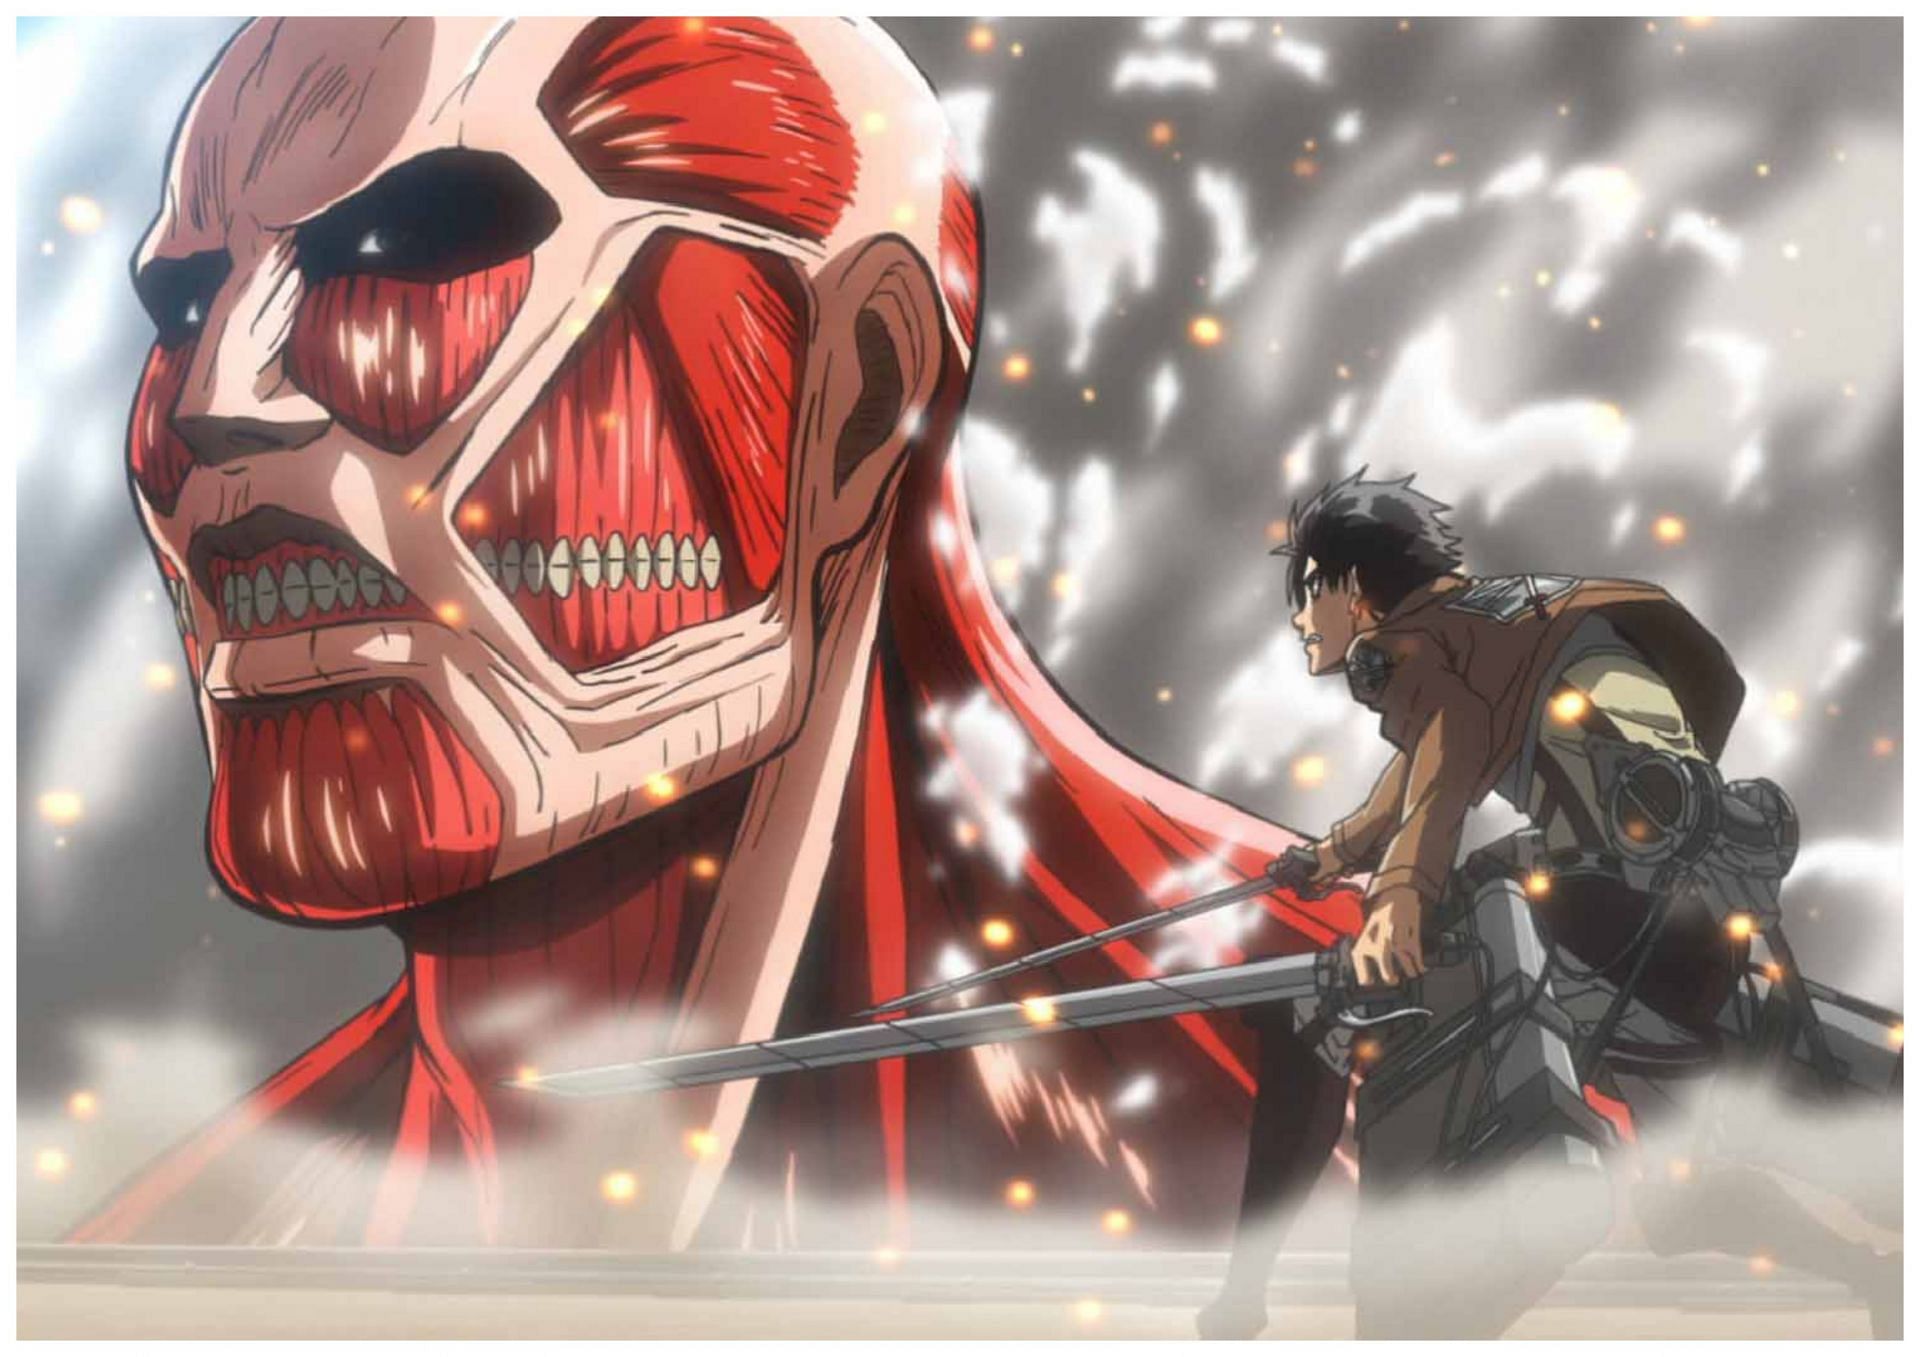 AOT or Attack on Titan - Most popular anime (Image via Wit Studio)